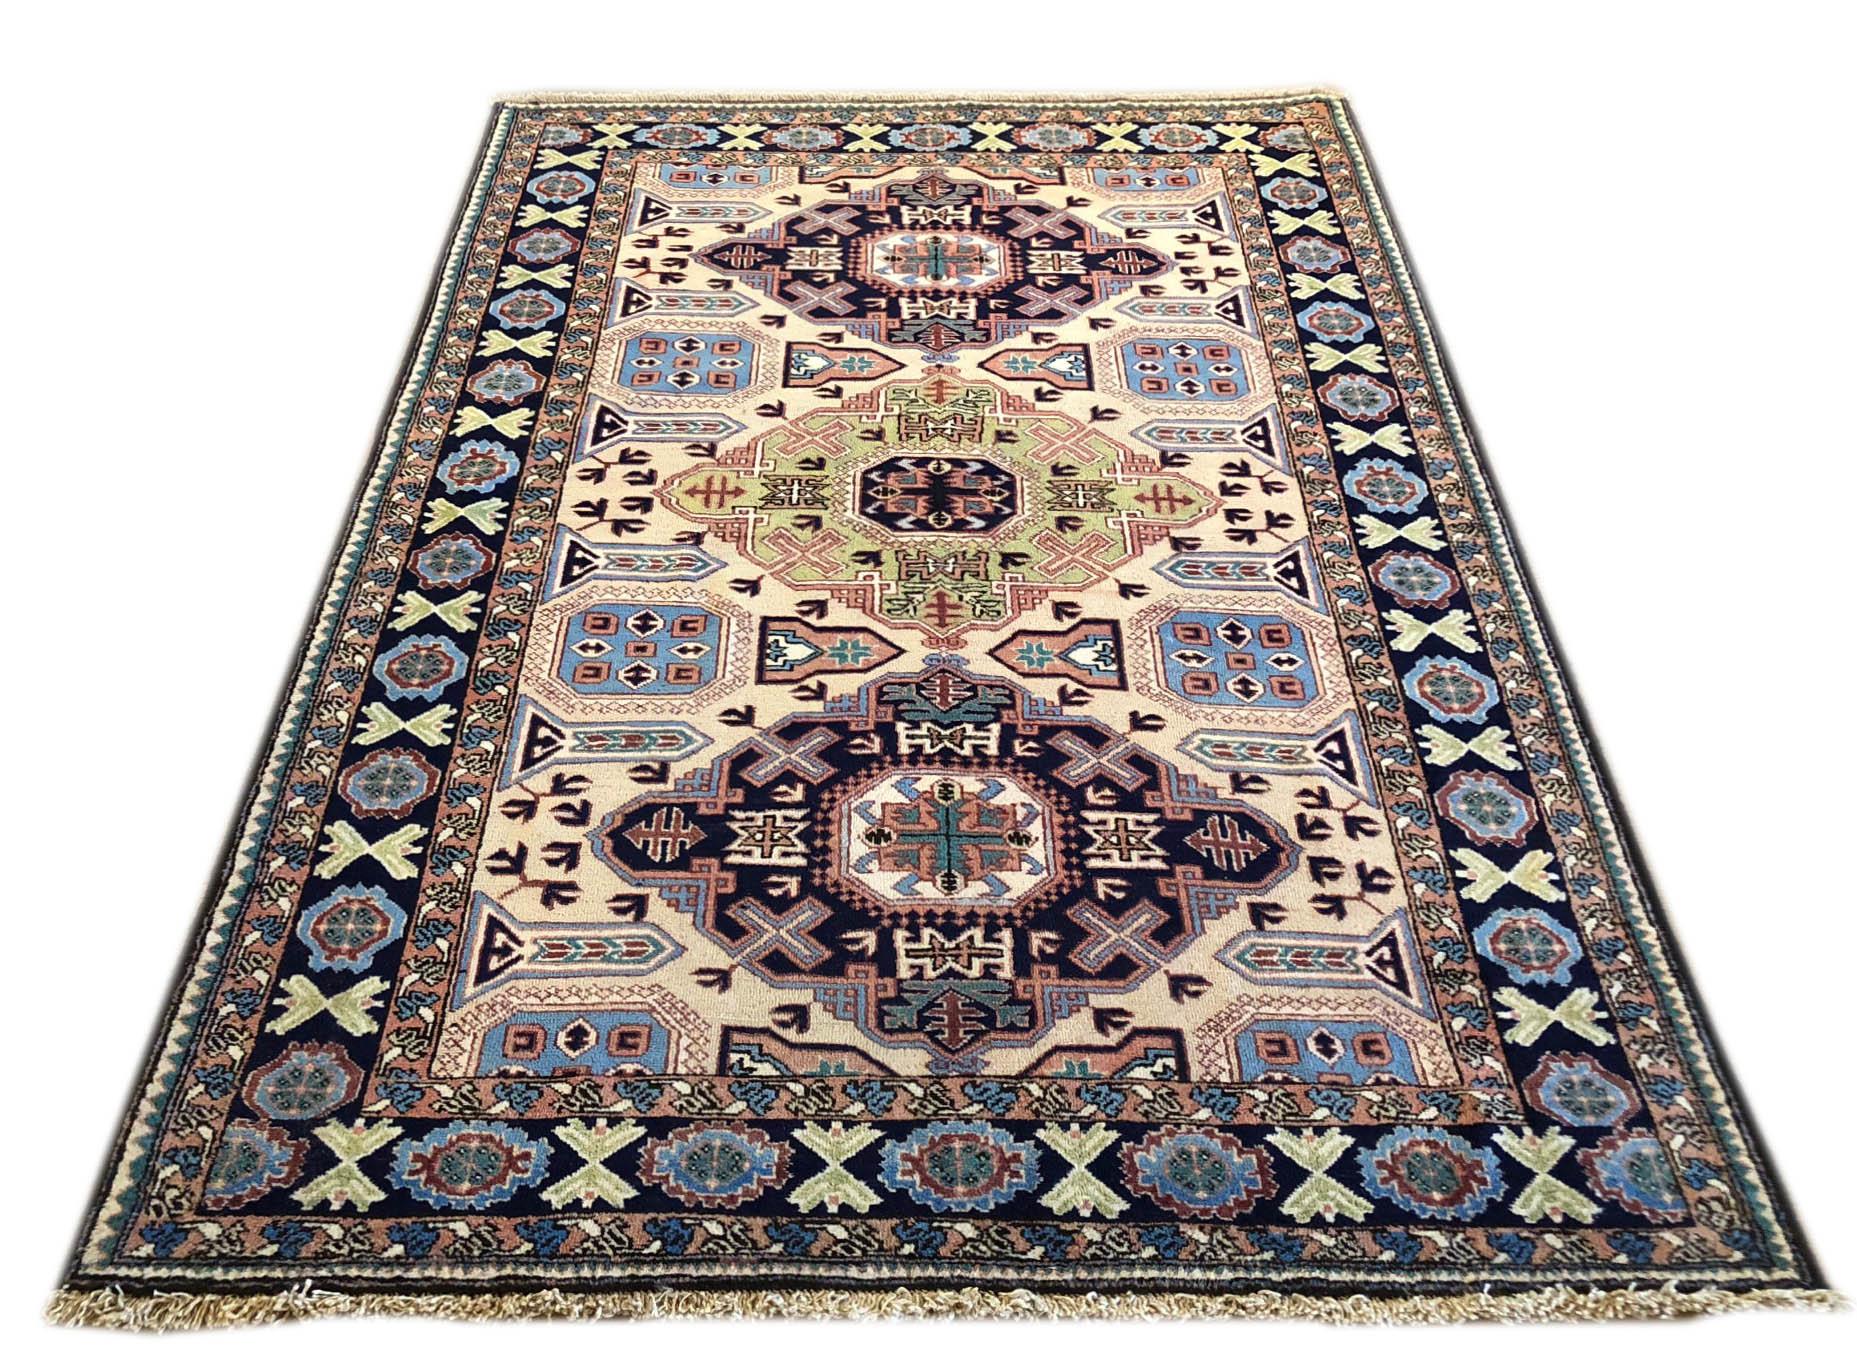 This rug is knotted in the province of Azarbayjan in north west of Iran. The design is geometric with repeated medallion. The pile is wool with cotton foundation. The base color is cream and the border is blue. The design and color combination can